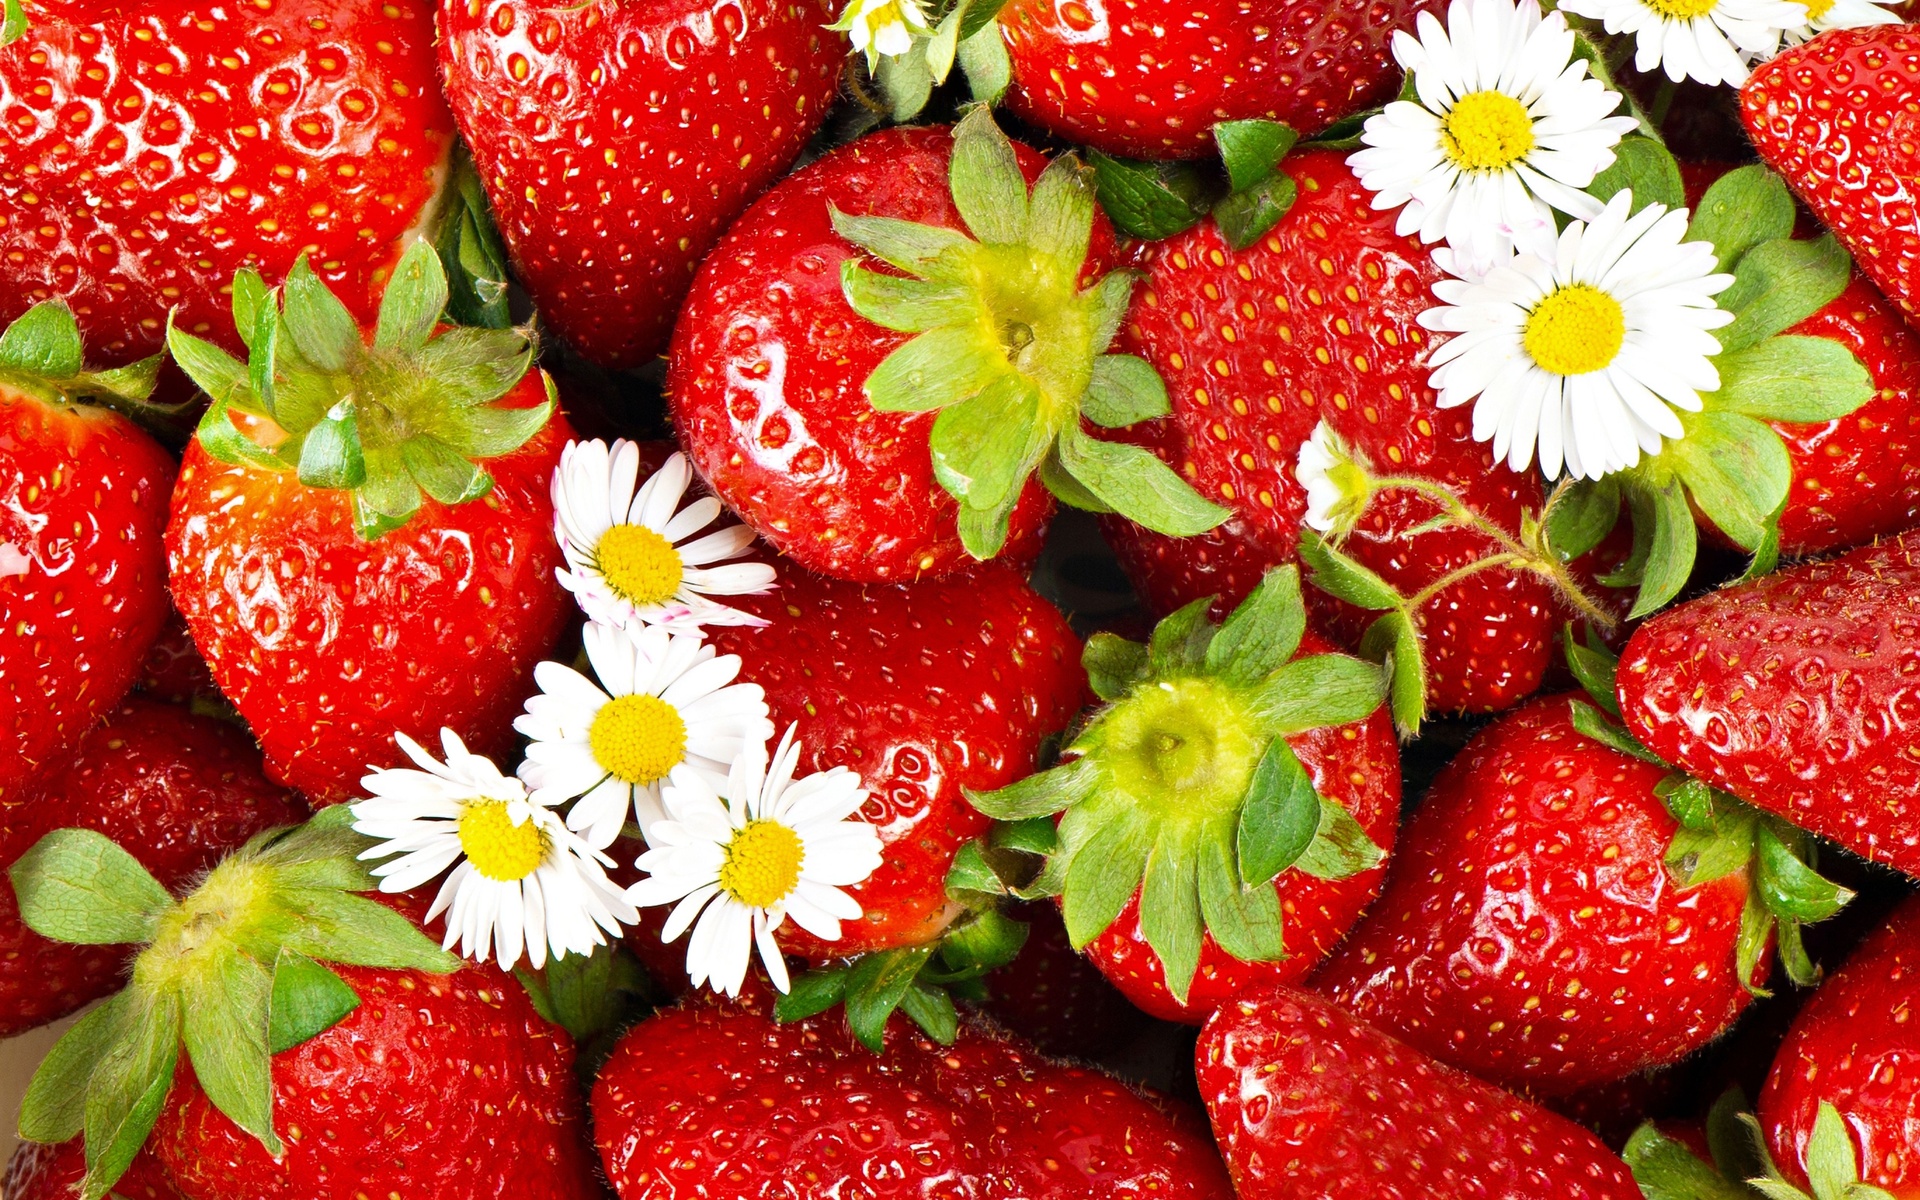 Strawberry Wallpapers Pictures Images HD Wallpapers Download Free Images Wallpaper [wallpaper981.blogspot.com]